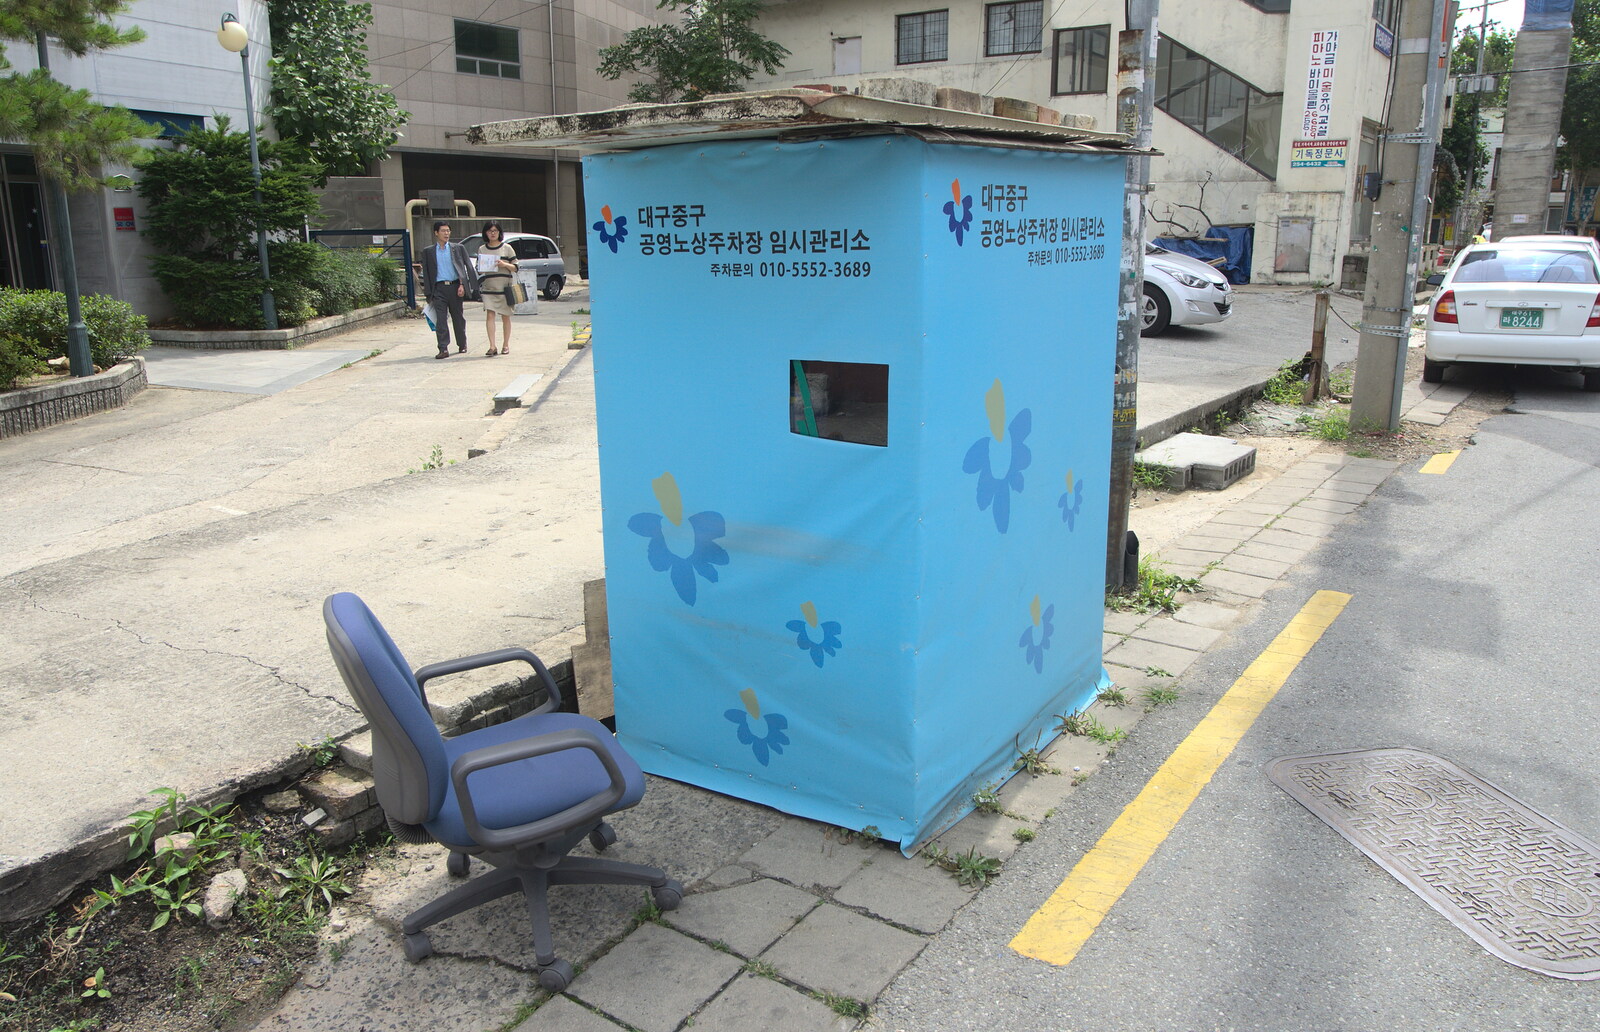 A curious blue hut with a peep-hole in the side from Seomun Market, Daegu, South Korea - 1st July 2012